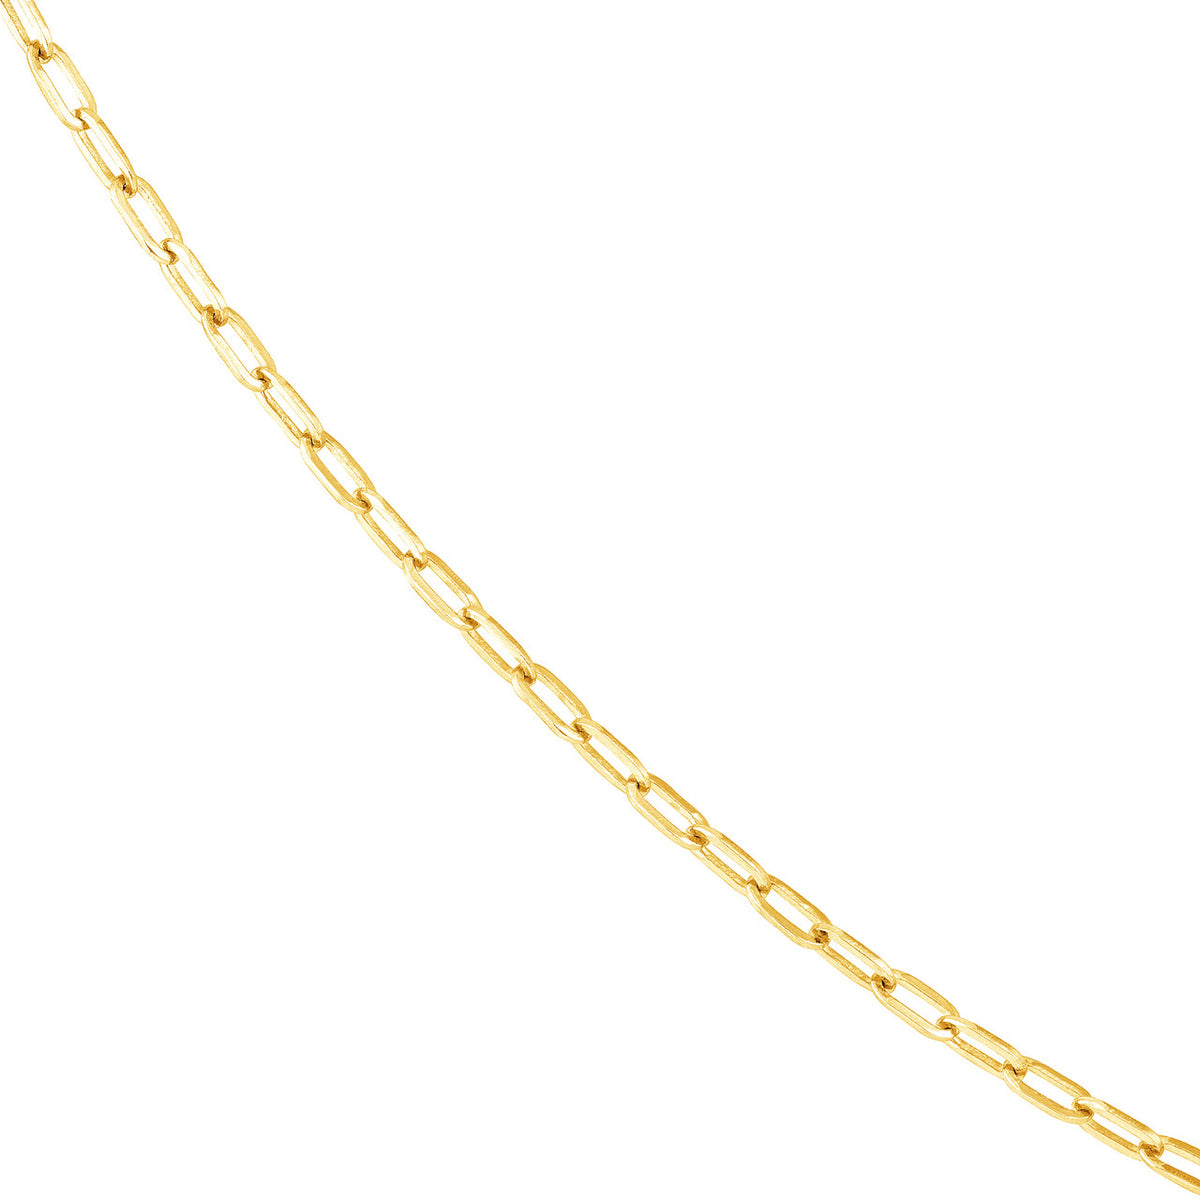 14K Yellow Gold or White Gold or Rose Gold 2.5mm Paper Clip Chain Necklace with Pear Shape Lock